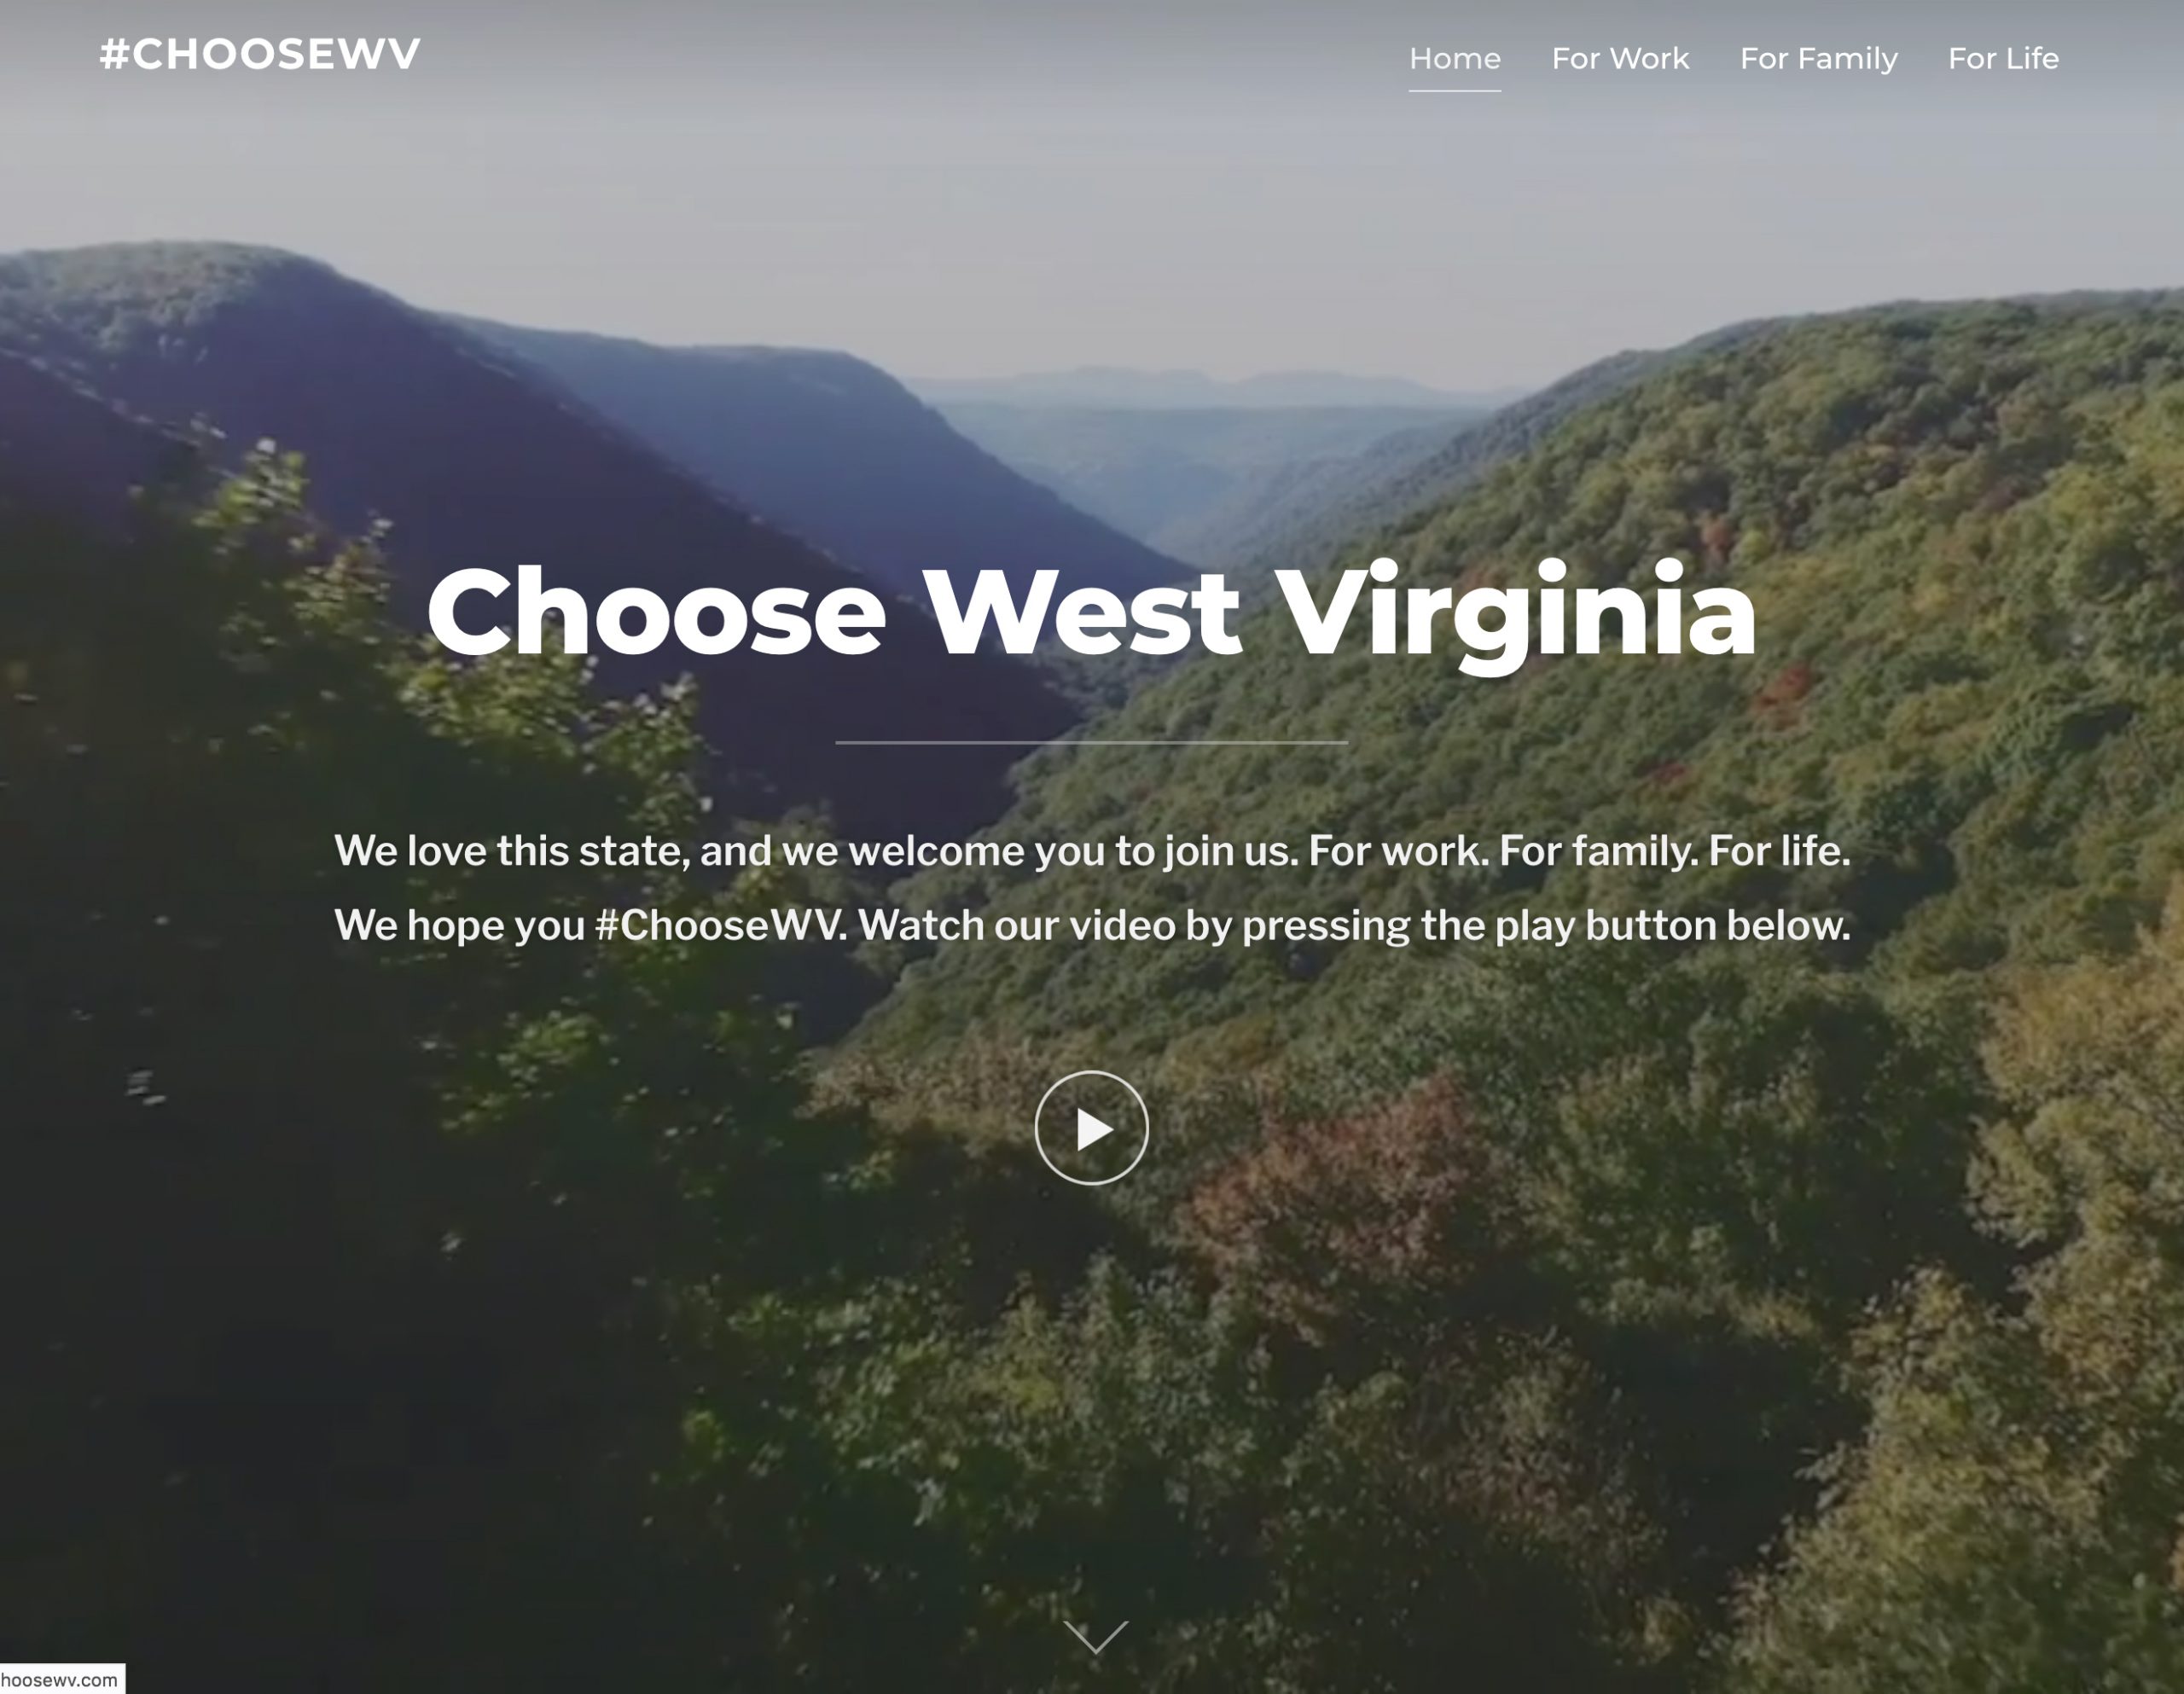 ChooseWV:  Campaign Focus is Pride in Place